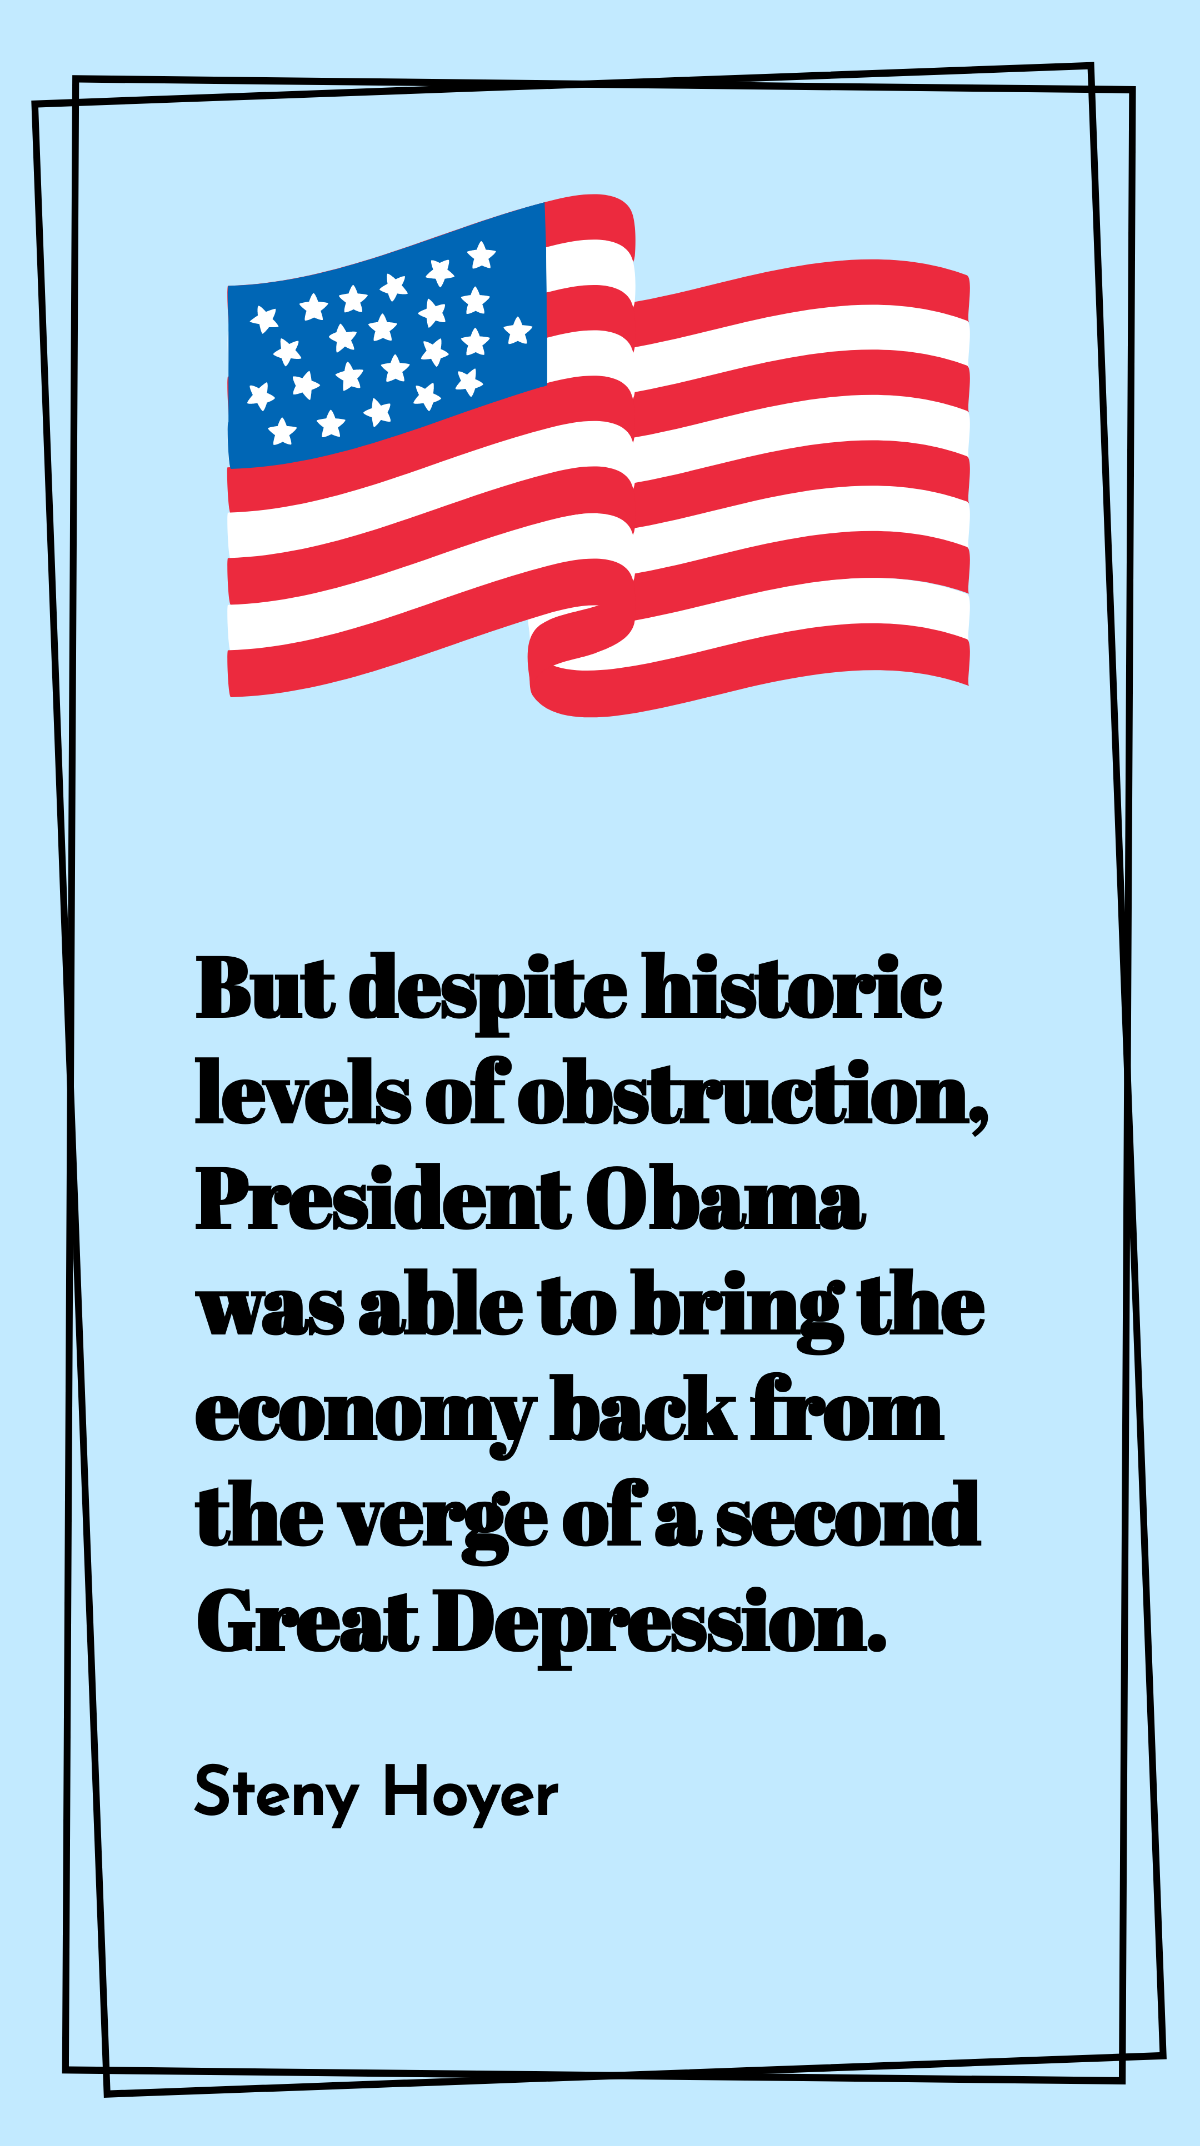 Steny Hoyer - But despite historic levels of obstruction, President Obama was able to bring the economy back from the verge of a second Great Depression. Template